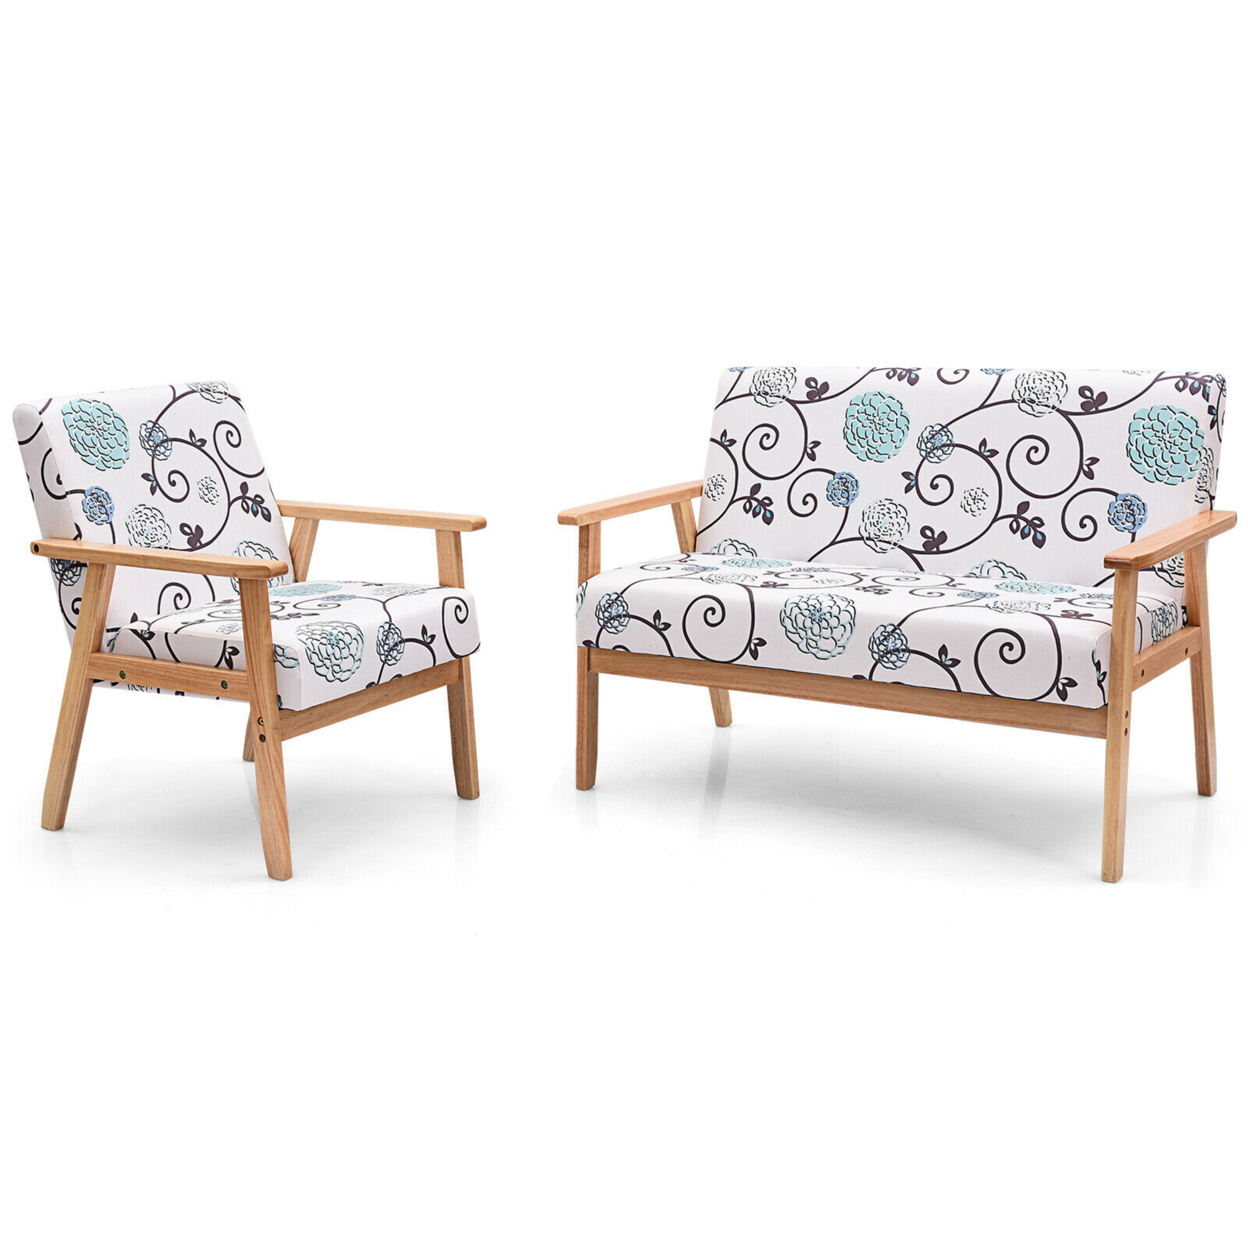 Modern Living Room Sofa Set W/ Loveseat Sofa Couch & Accent Armchair - White & Blue Floral